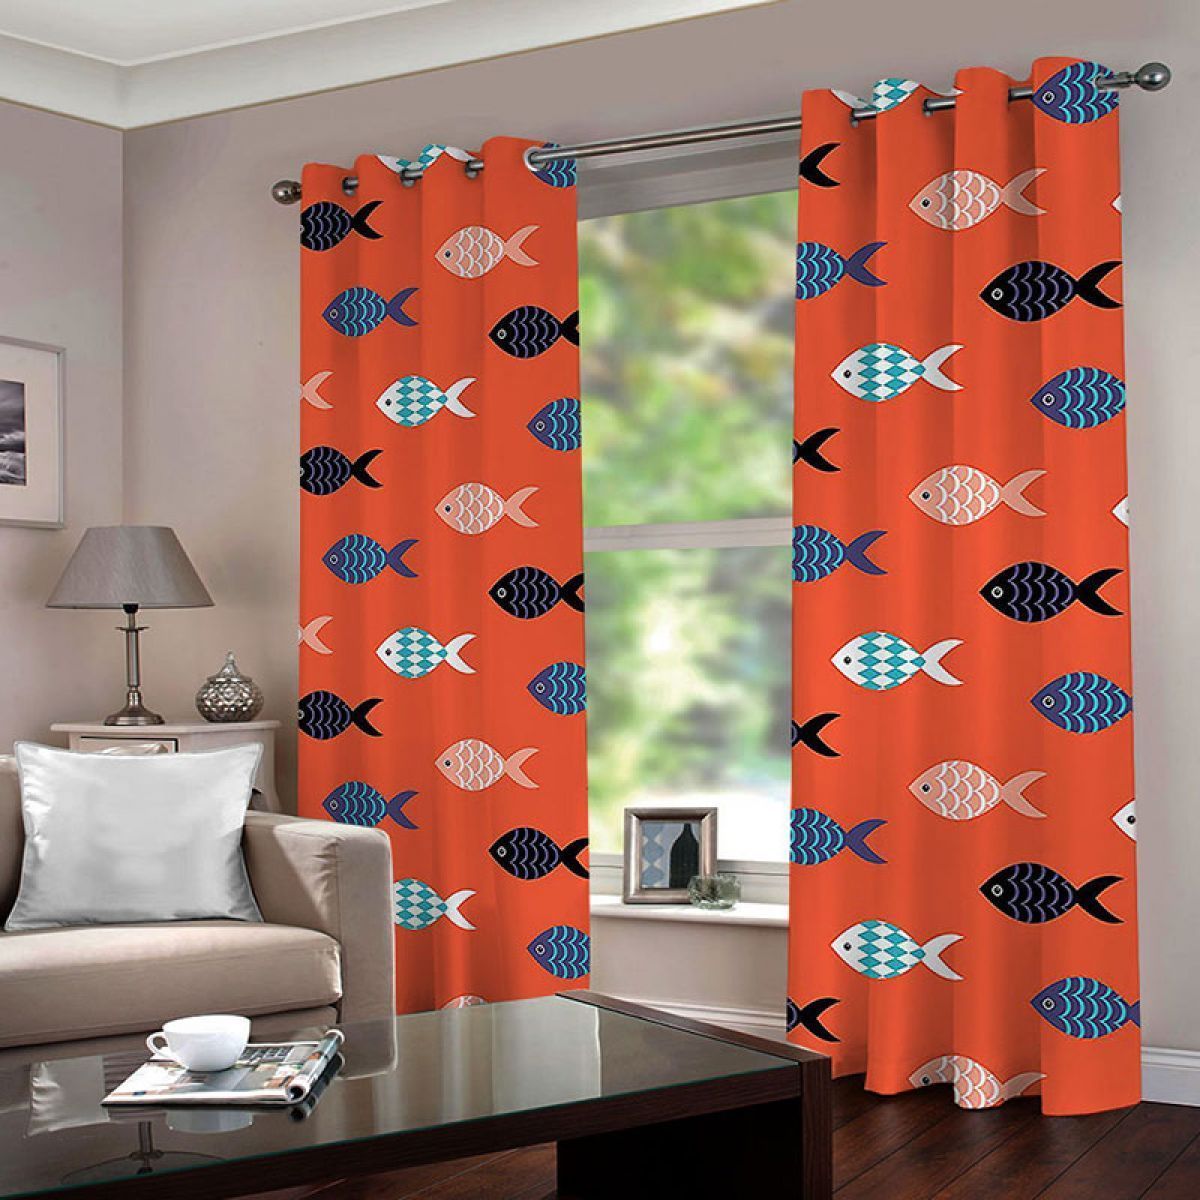 3d Painted Fish Orange Background Printed Window Curtain Home Decor